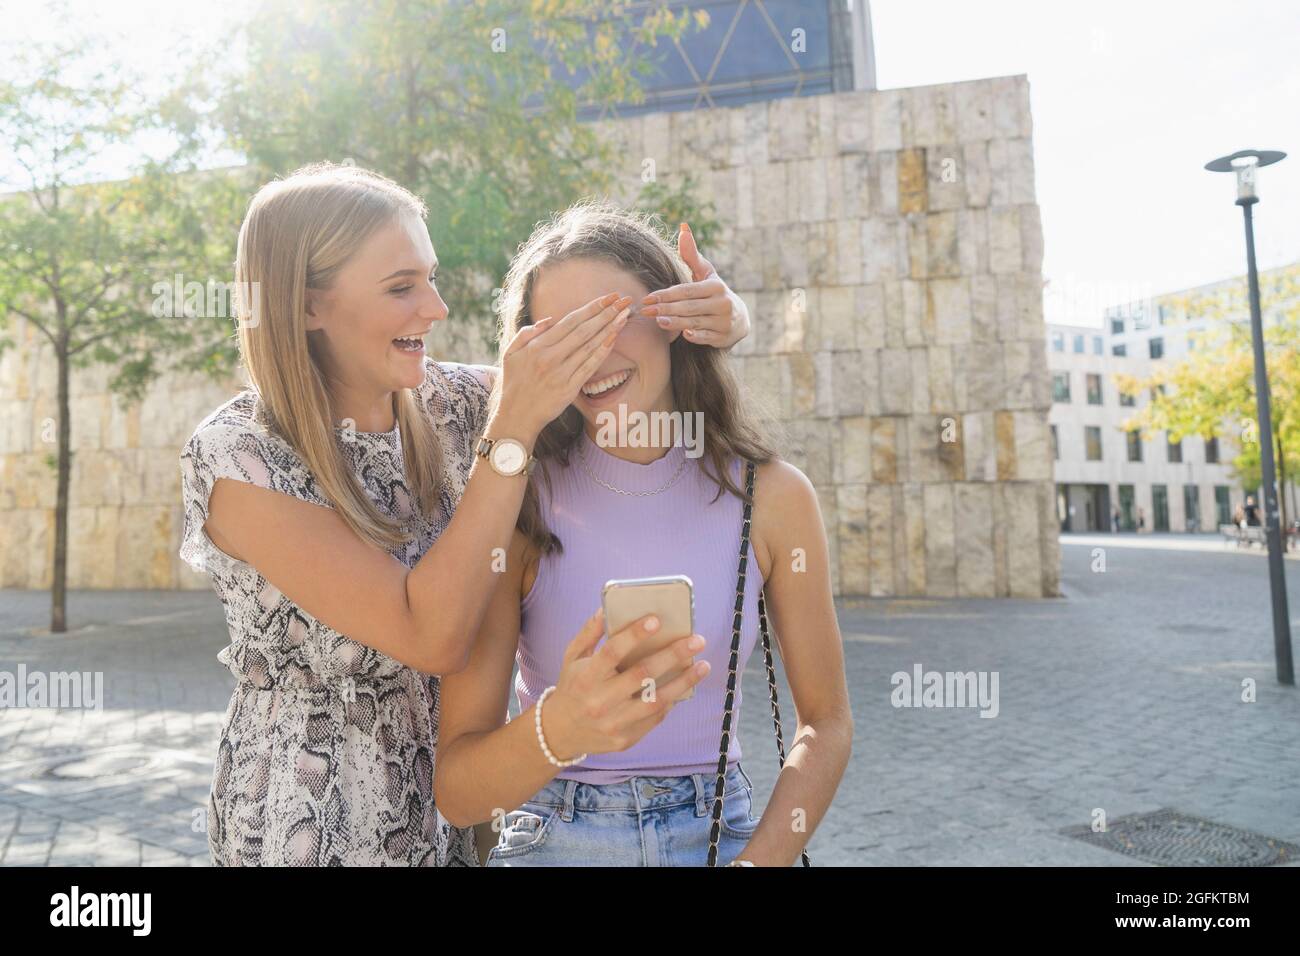 Girlfriend Surprises Girlfriend And Covers her Eyes In City Stock Photo